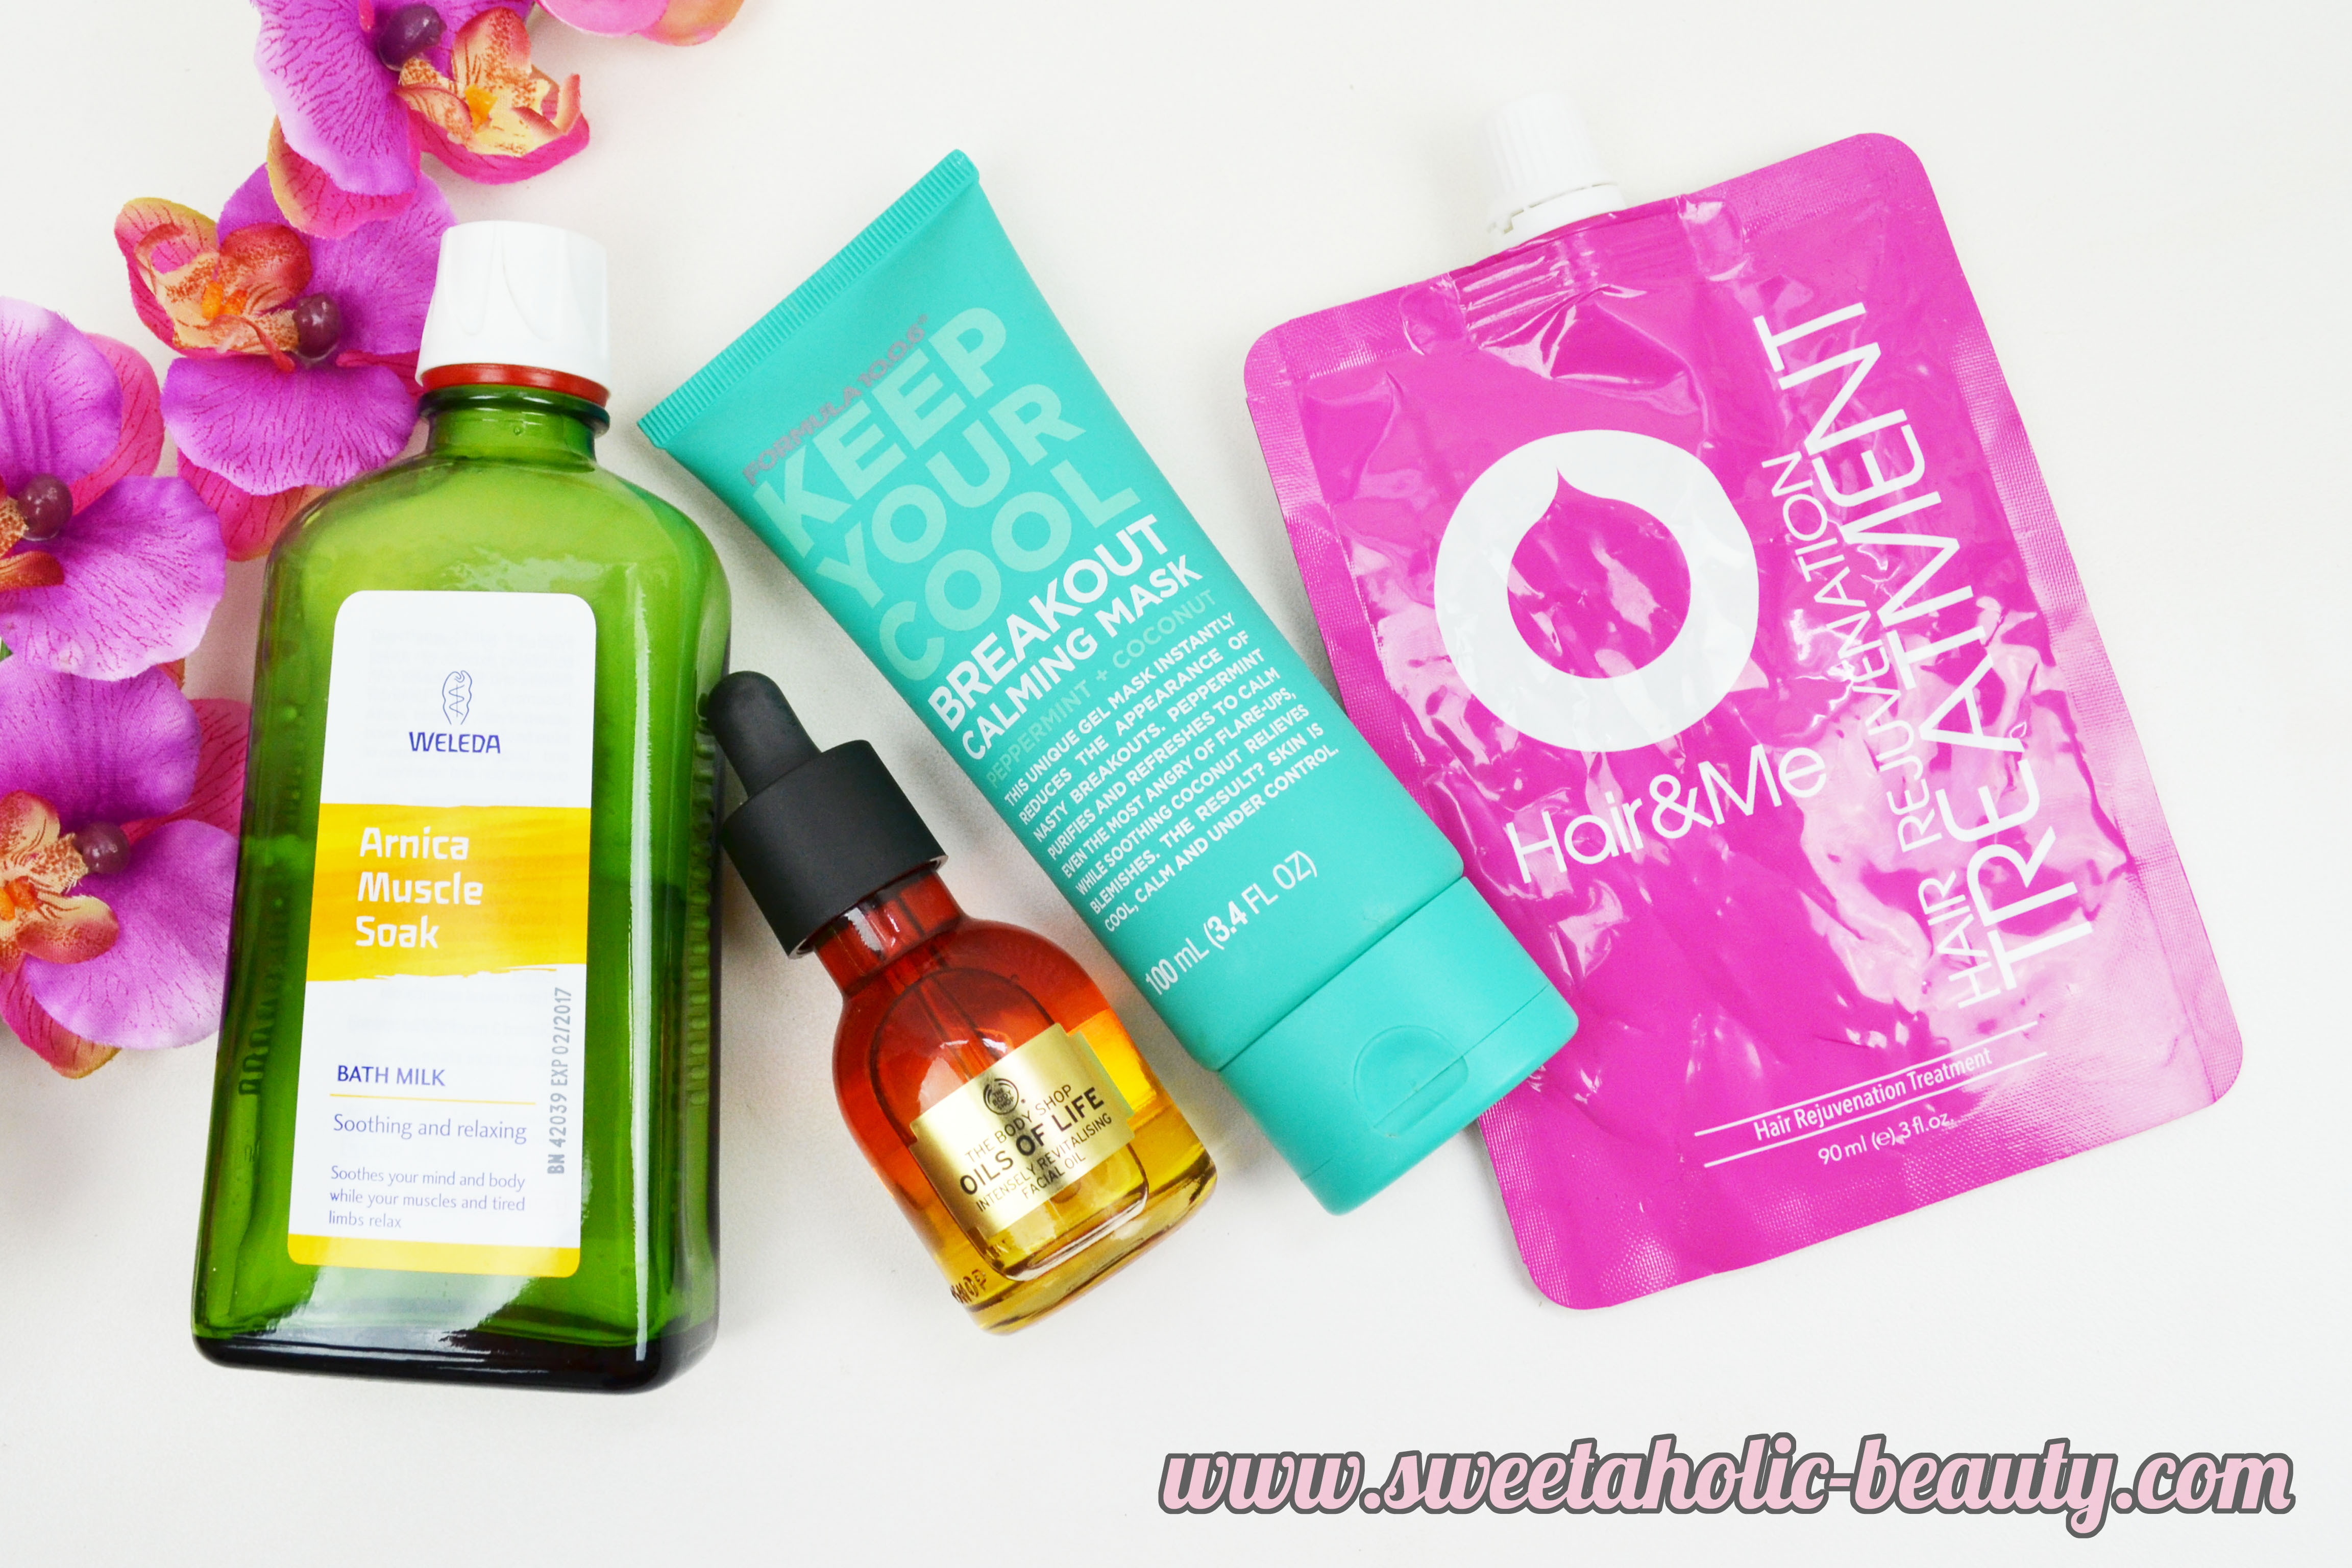 4 Top Rejuvenating Products - Sweetaholic Beauty